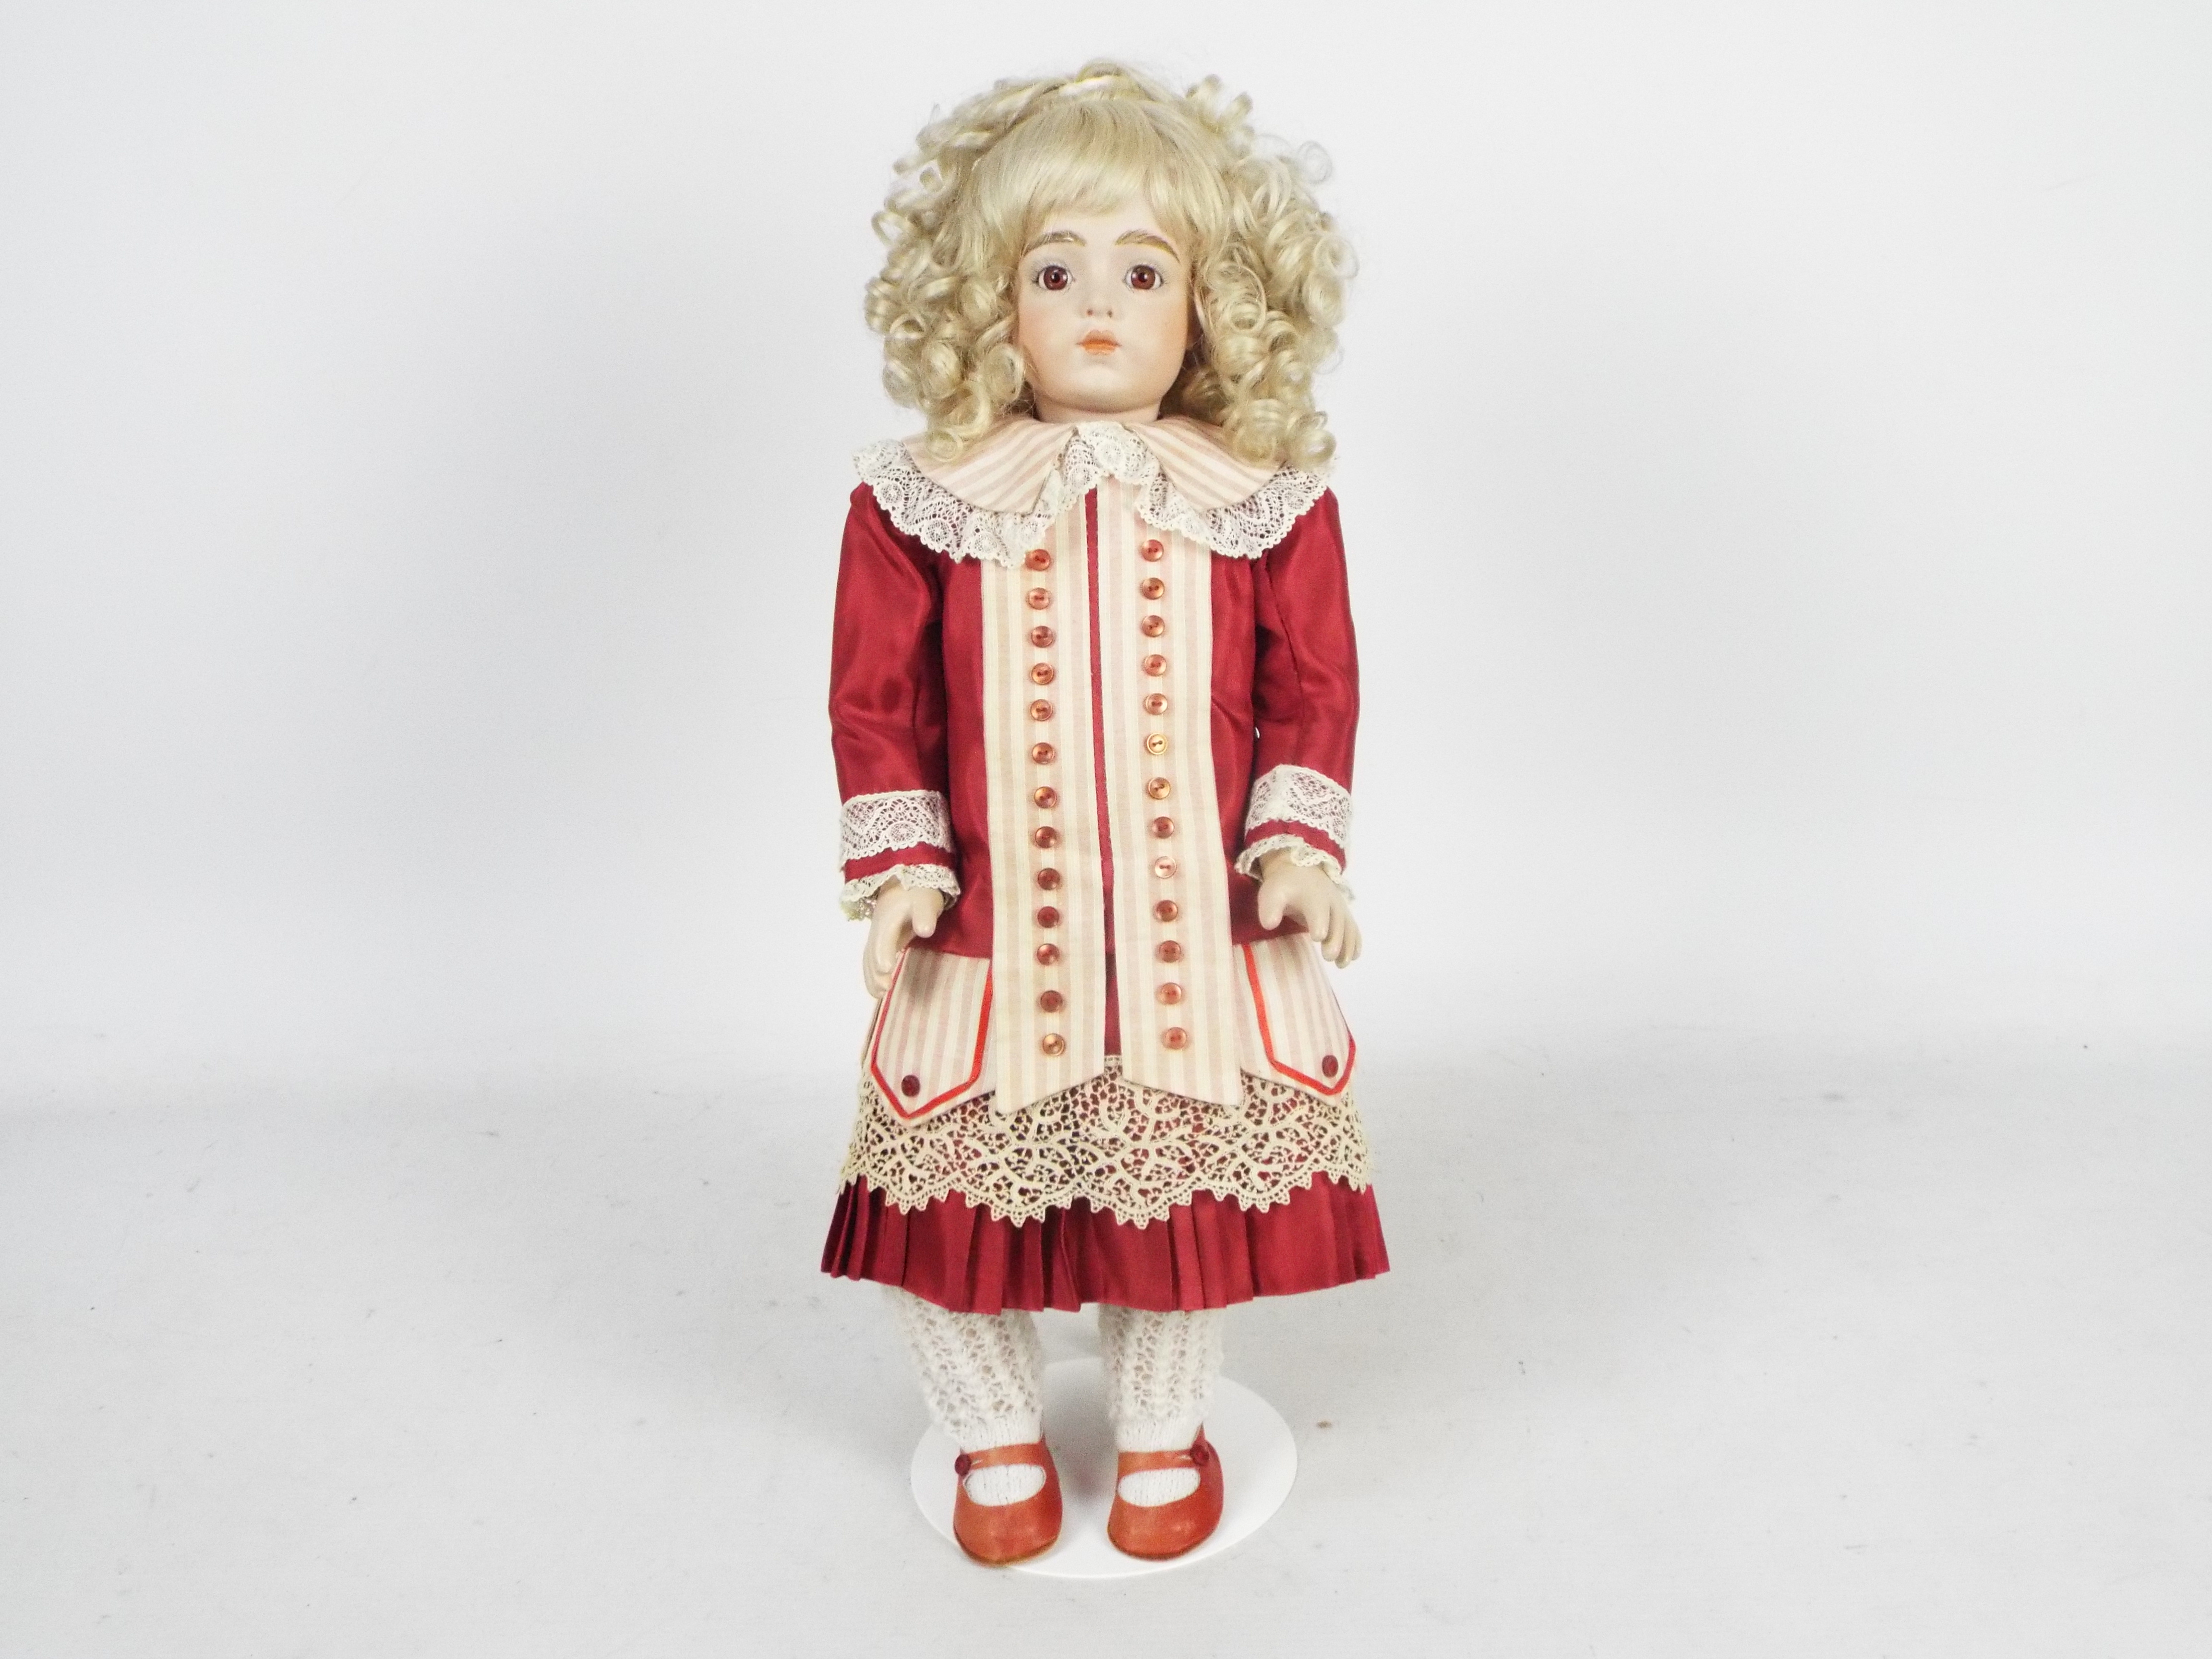 Bru Jne - A reproduction of a Bru Jne bisque head doll on stand.